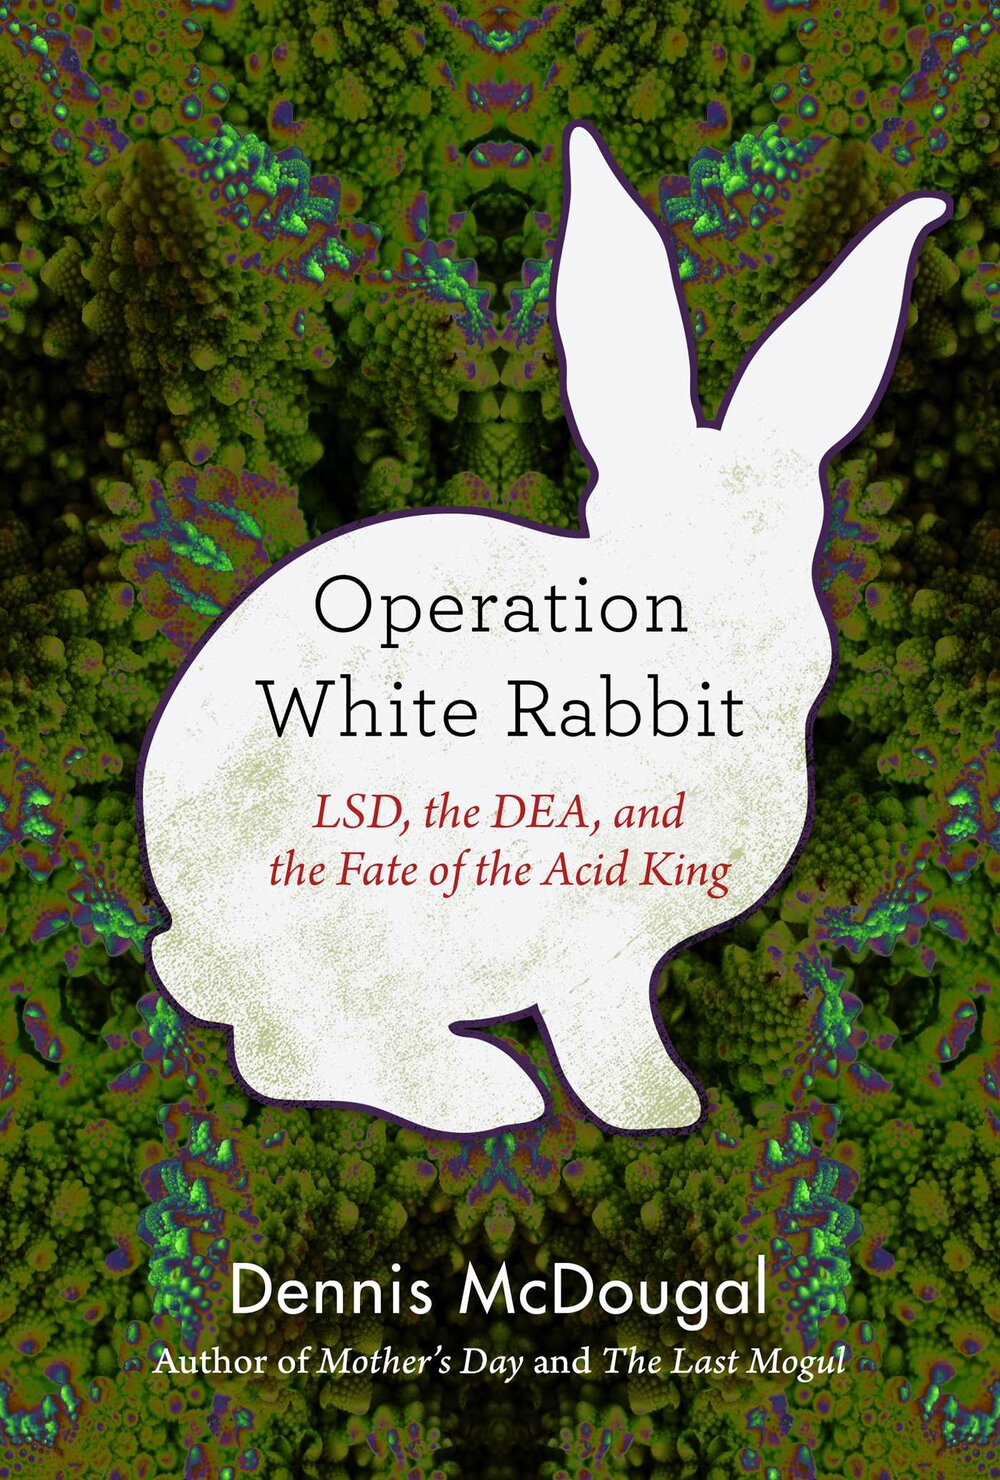 Operation White Rabbit: LSD, the DEA, and the Fate of the Acid King by Dennis McDougal